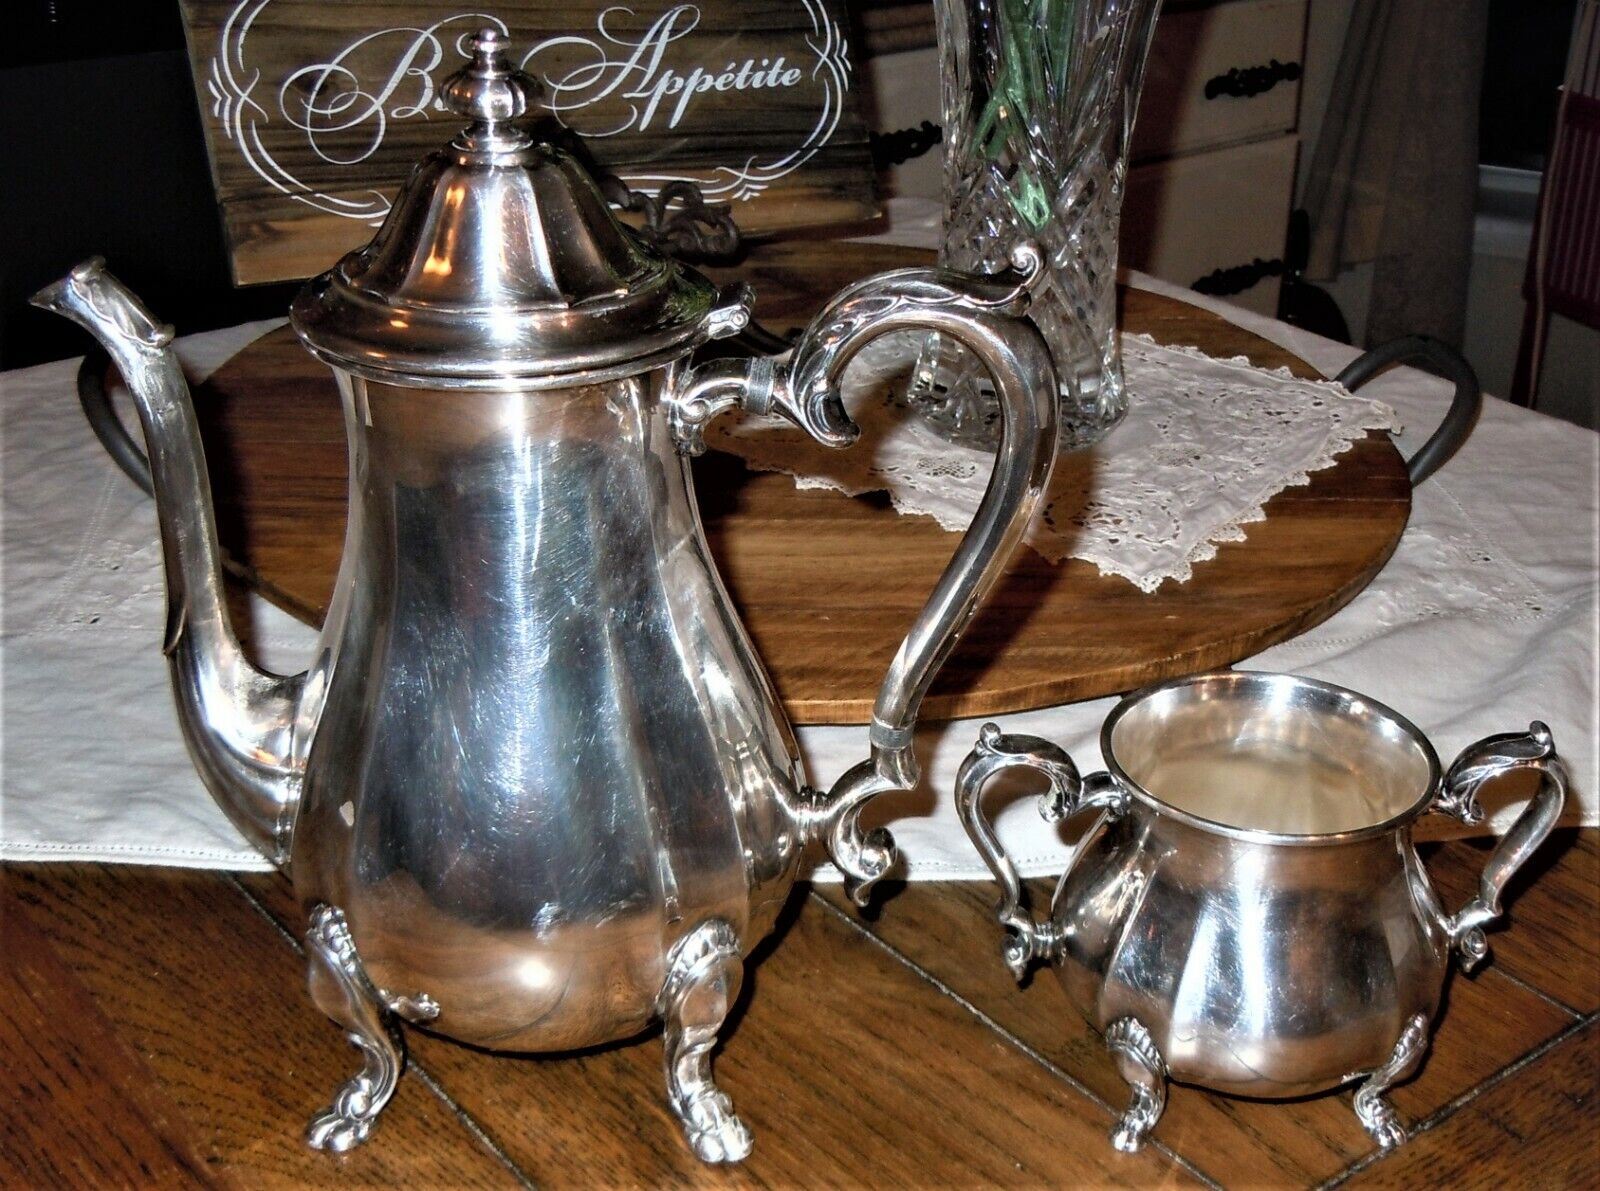 Chippendale Footed Coffee/Tea Pot 6301 Silver Plate  Unbranded